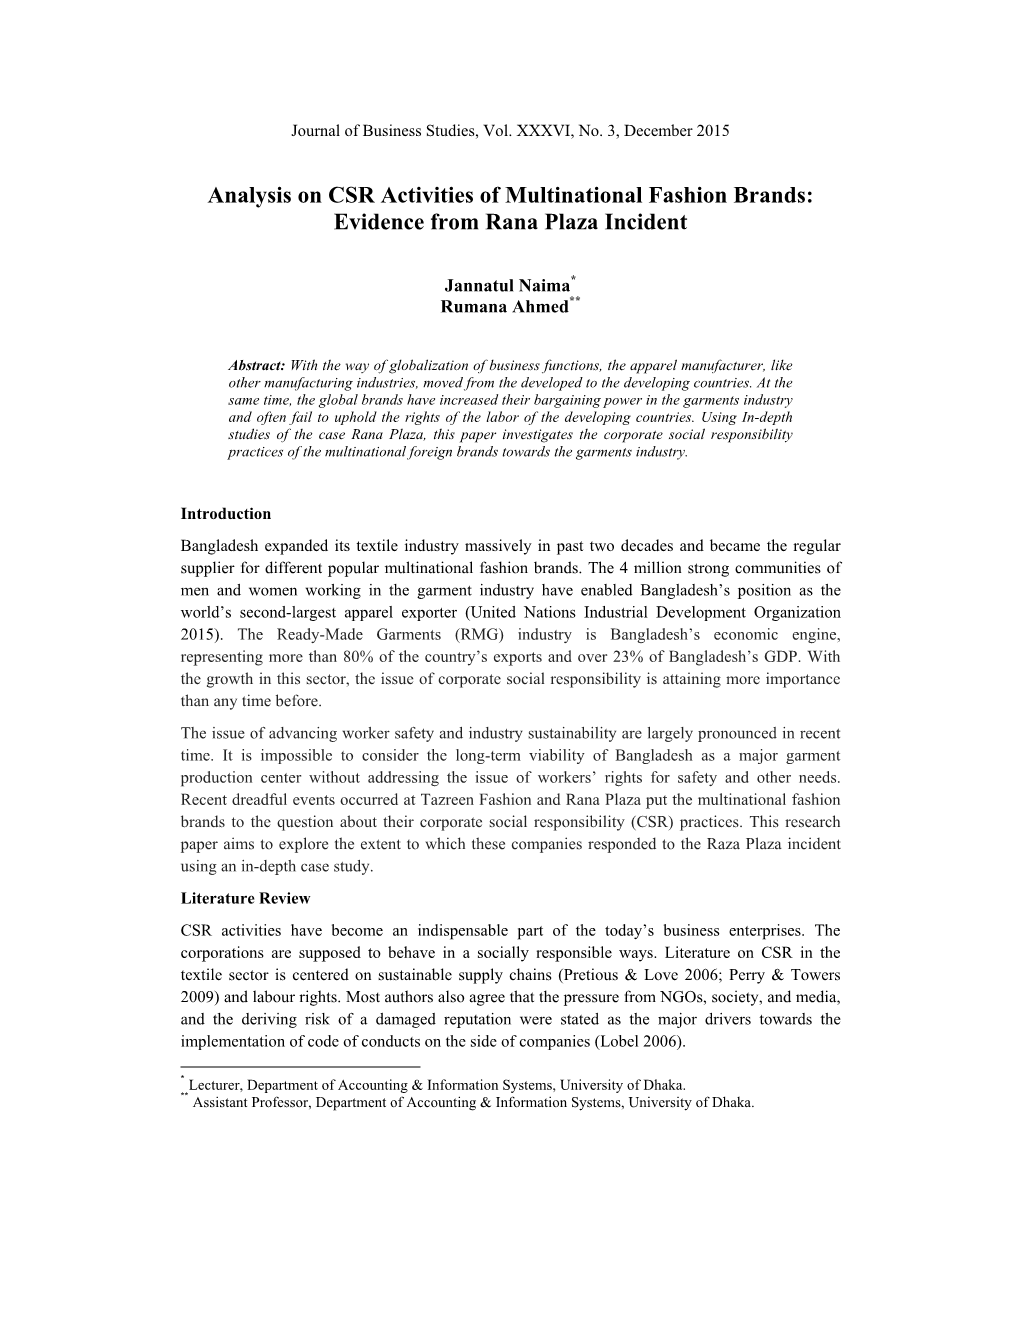 Analysis on CSR Activities of Multinational Fashion Brands: Evidence from Rana Plaza Incident